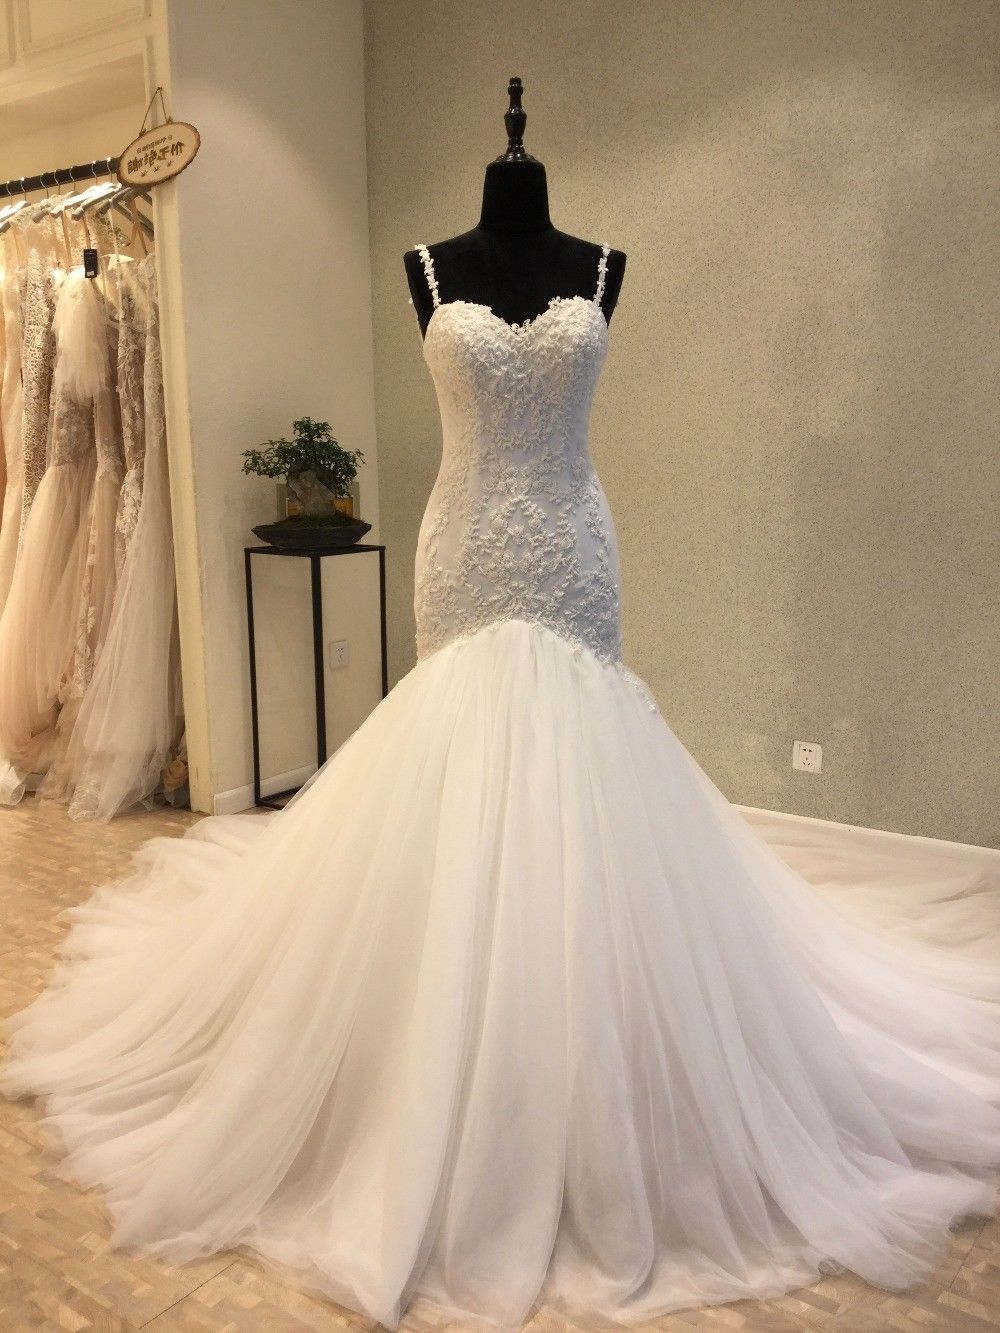 Spaghetti Strap Lace Appliqués Tulle Wedding Dress Featuring Open Back And Long Train